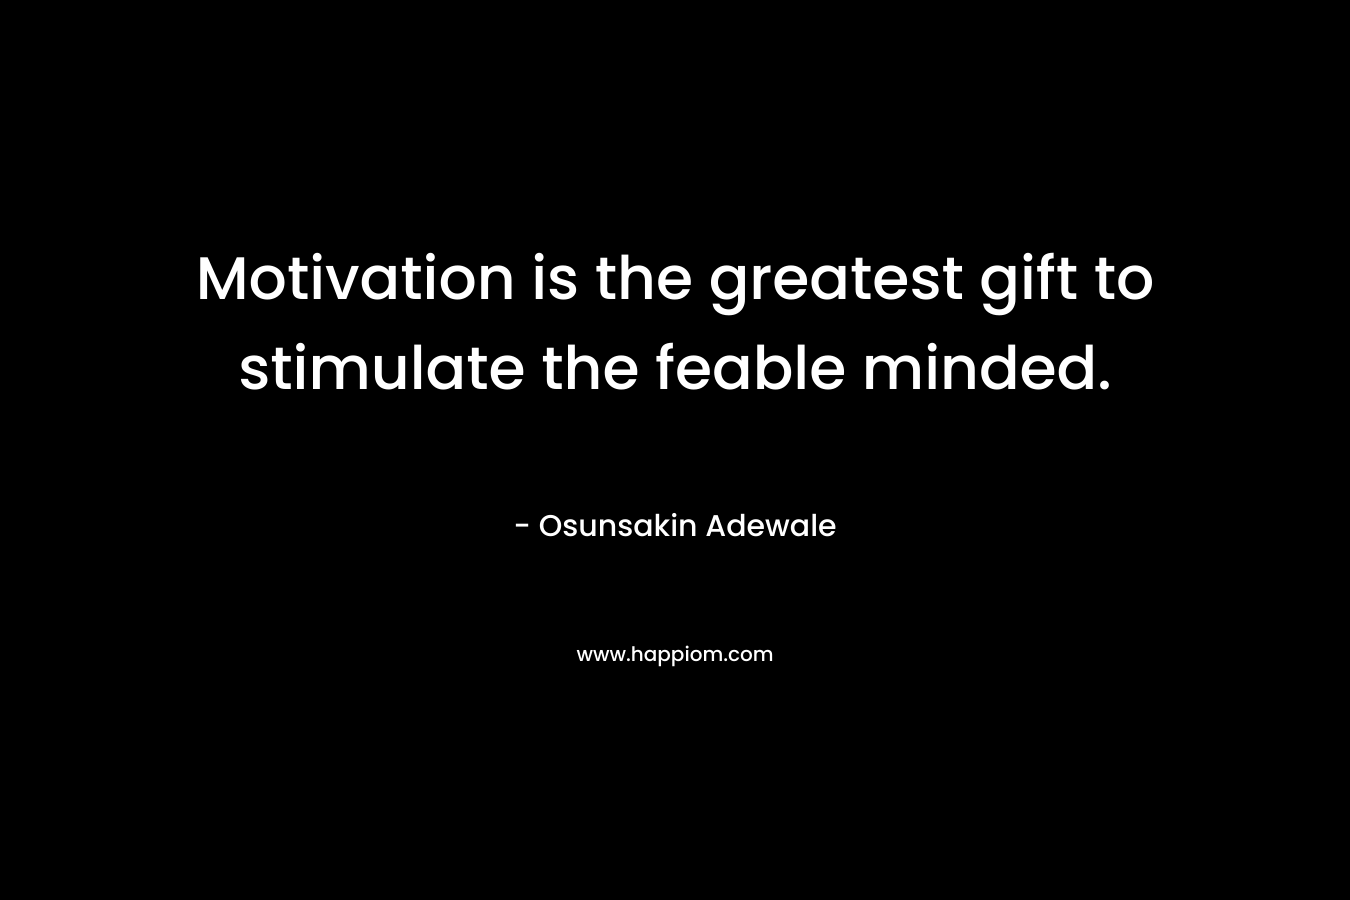 Motivation is the greatest gift to stimulate the feable minded. – Osunsakin Adewale